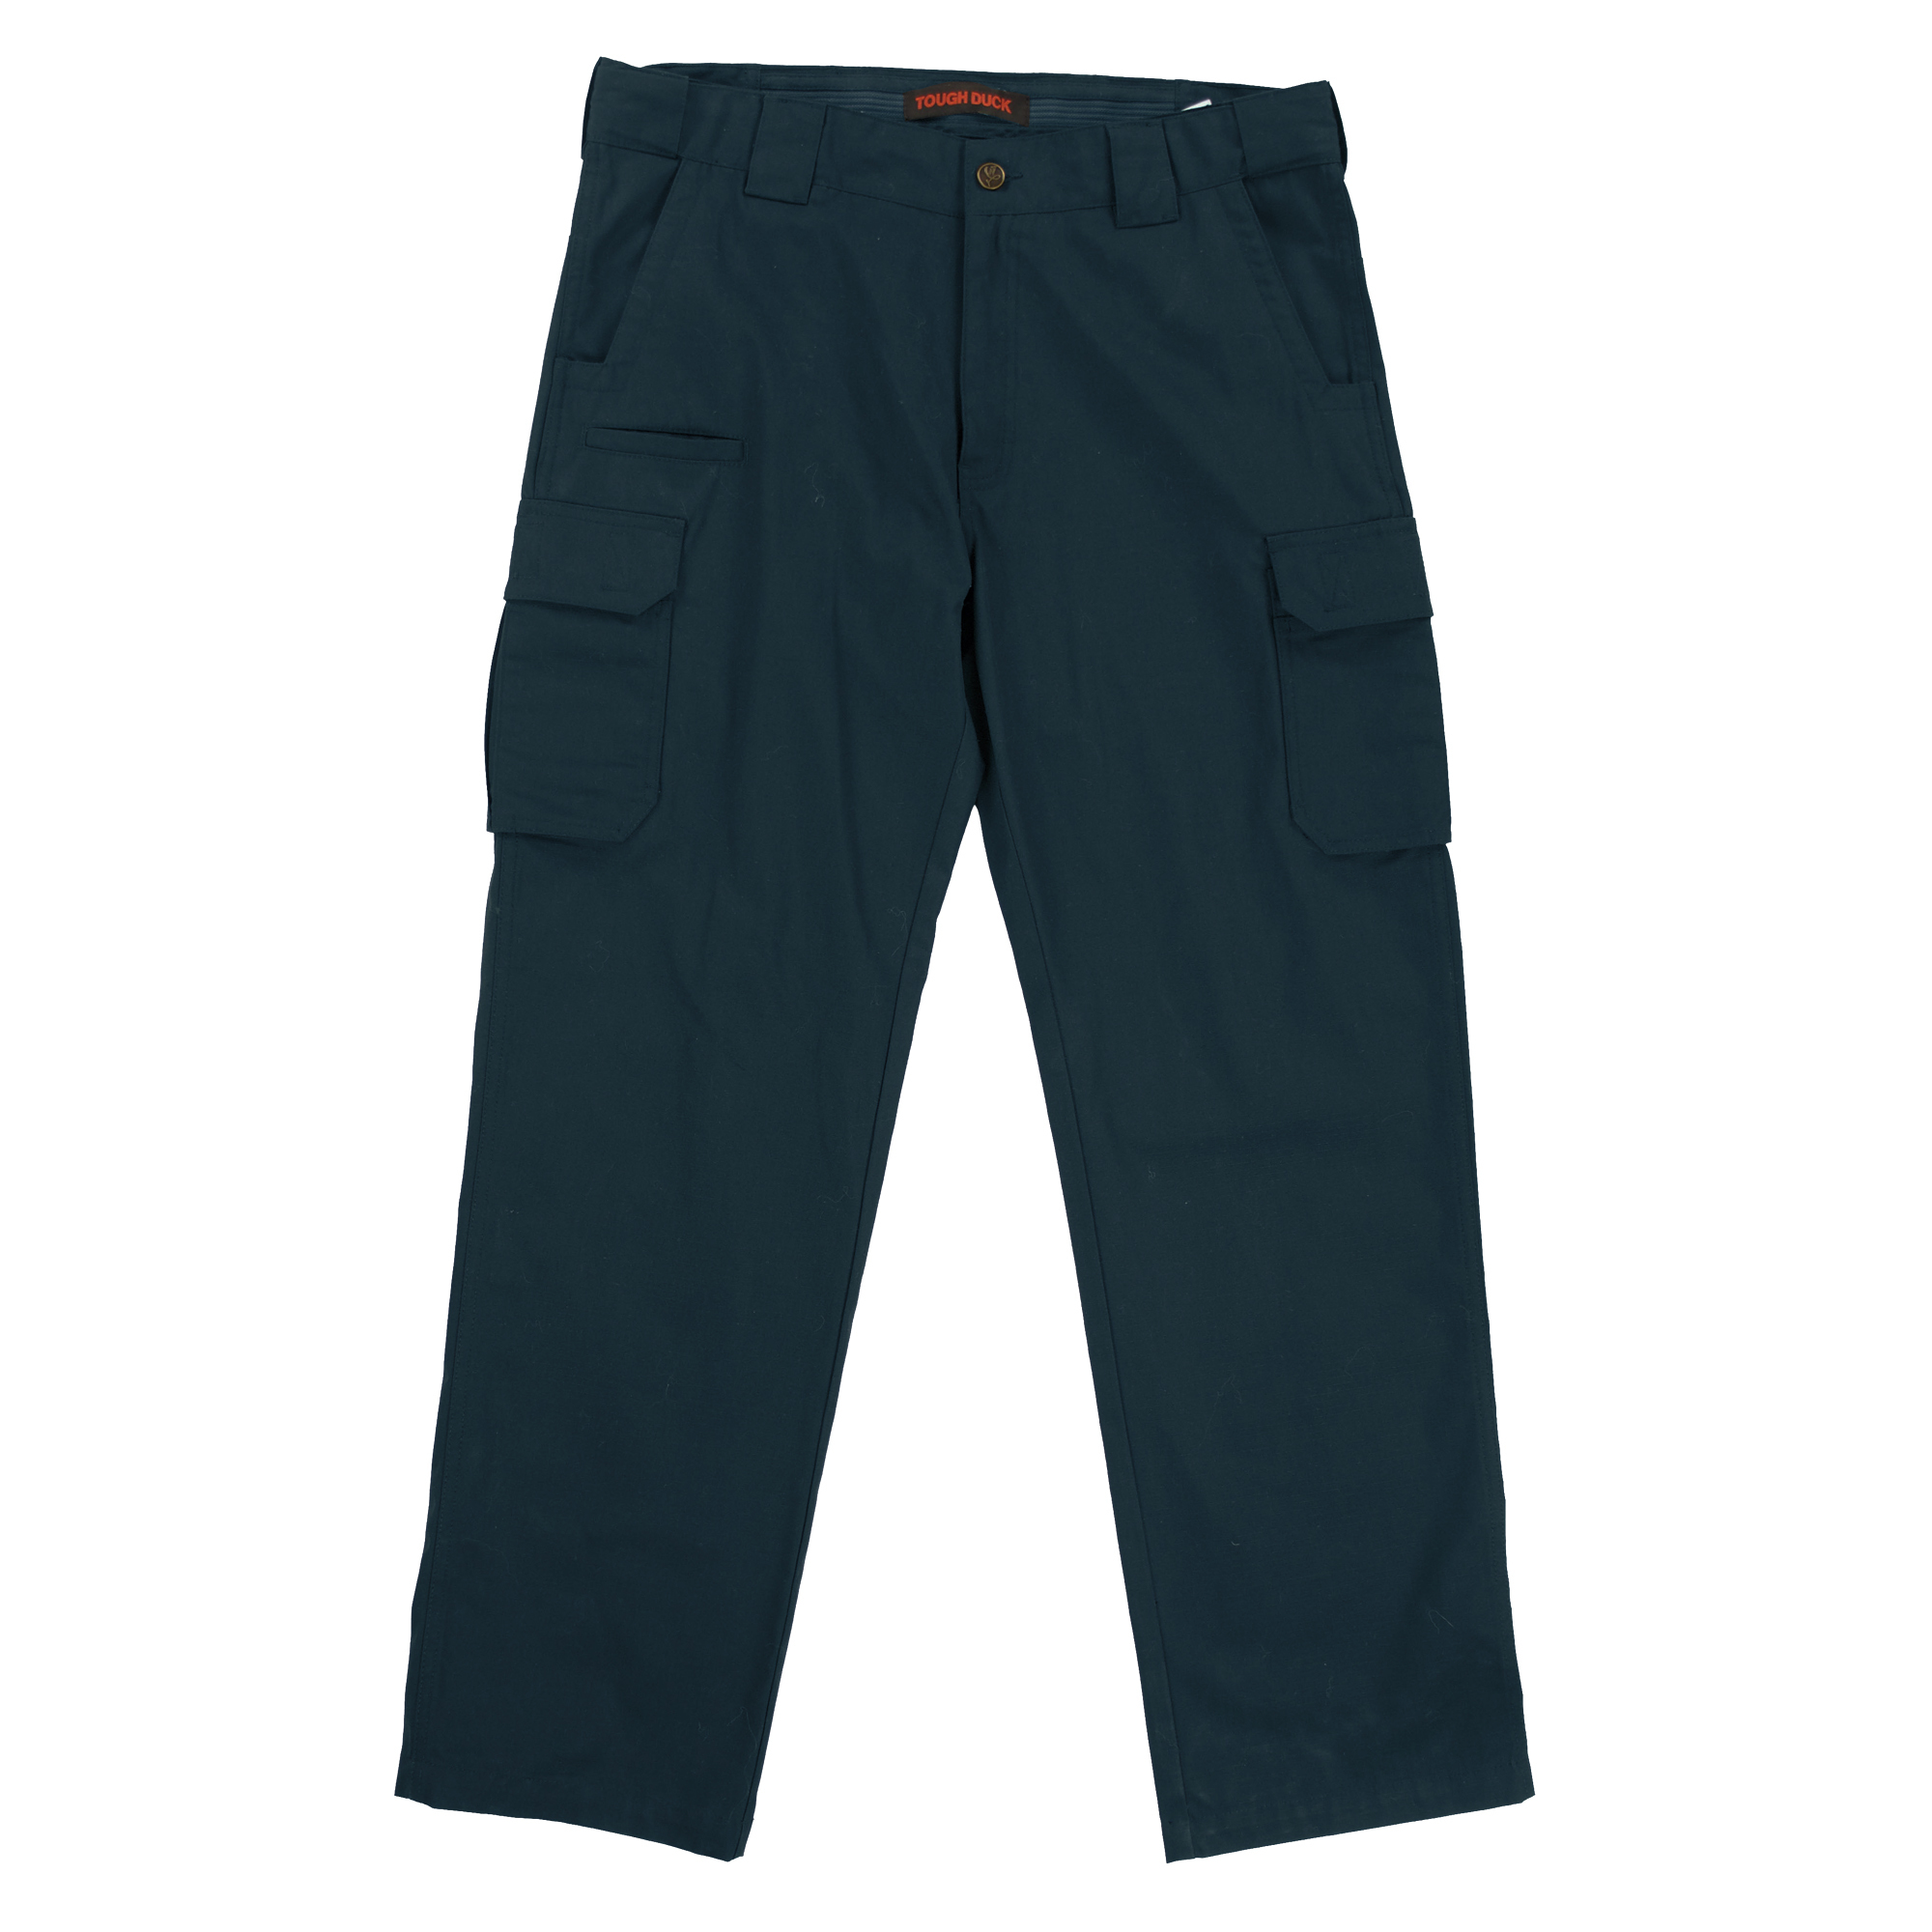 Tough Duck, Ripstop Cargo Pant, Waist 36 in, Inseam 34 in, Color Navy, Model WP113